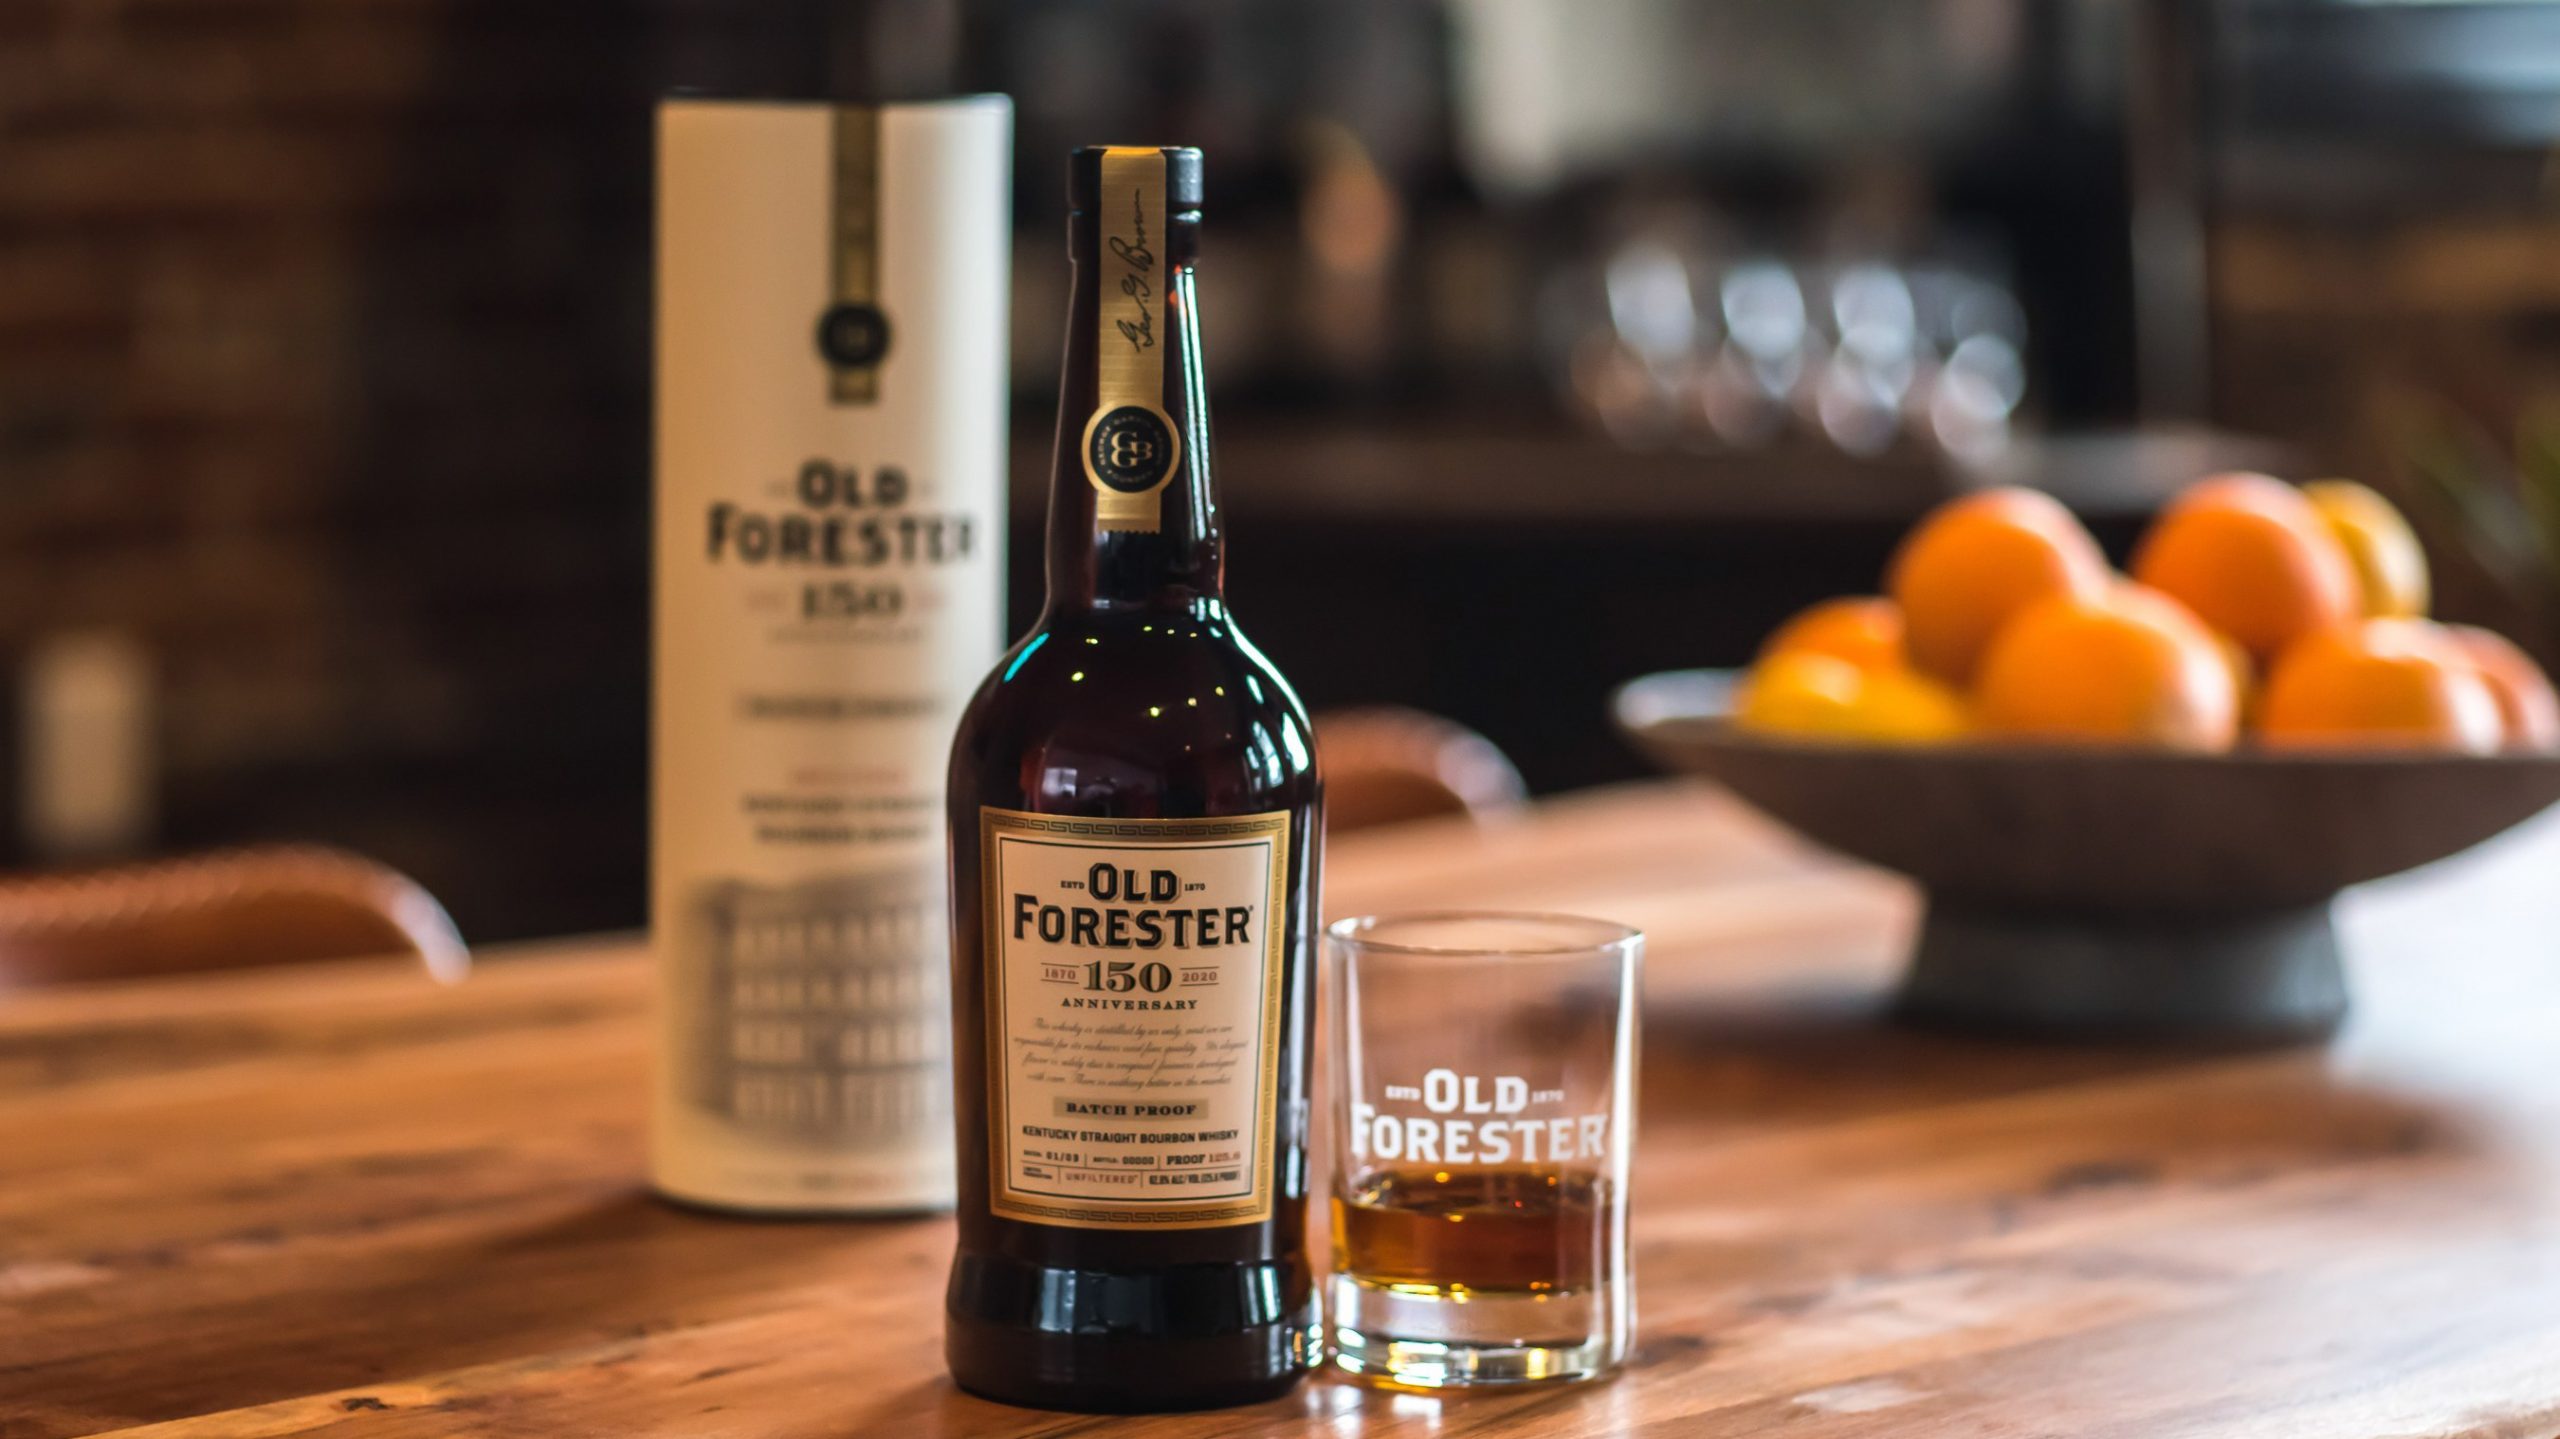 Old Forester 150th Anniversary Bourbon